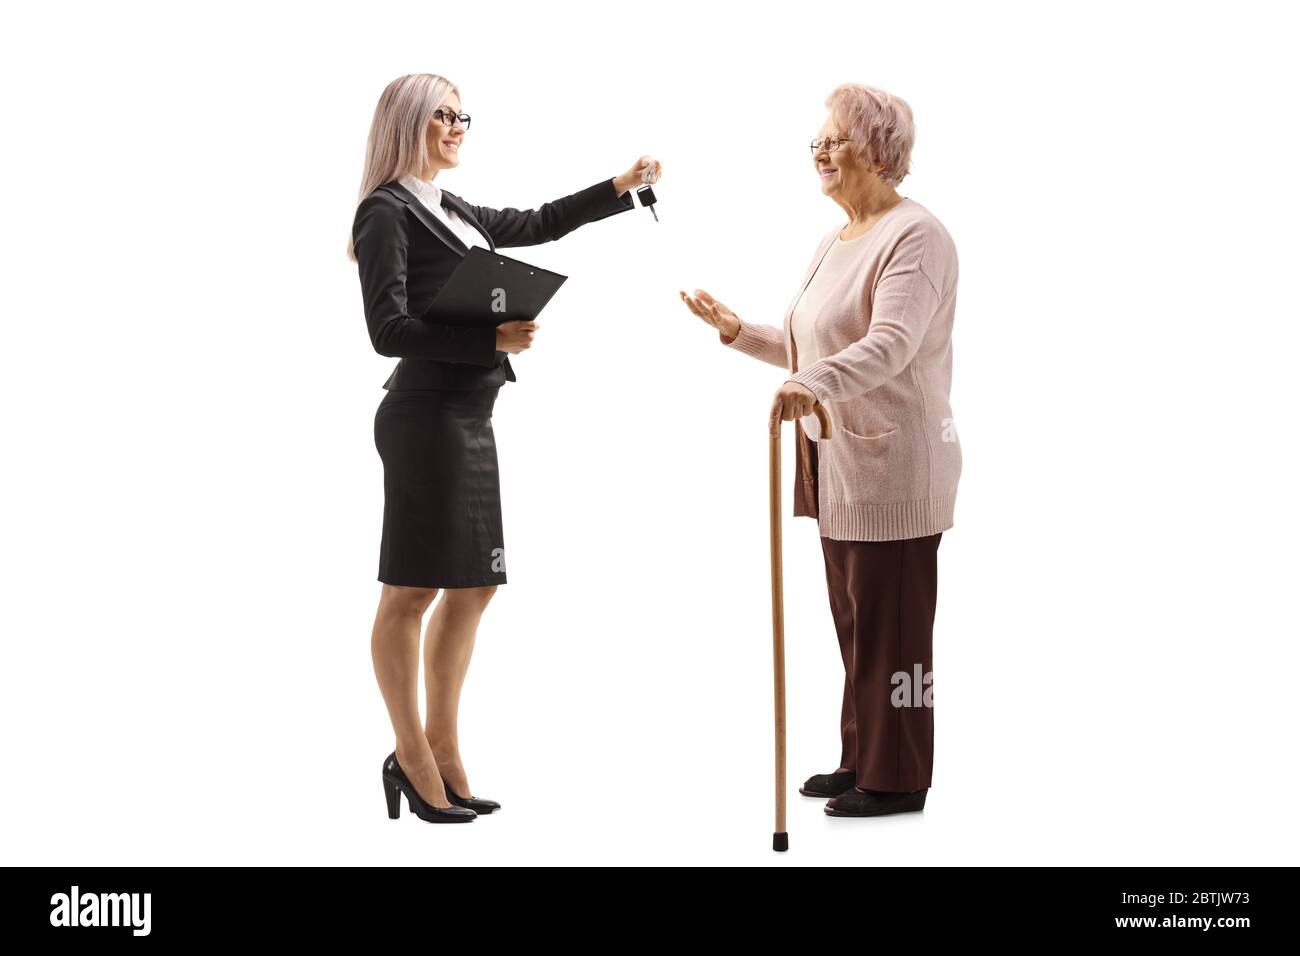 Full length profile shot of a professional woman giving car keys to an elderly woman with a walking cane isolated on white background Stock Photo